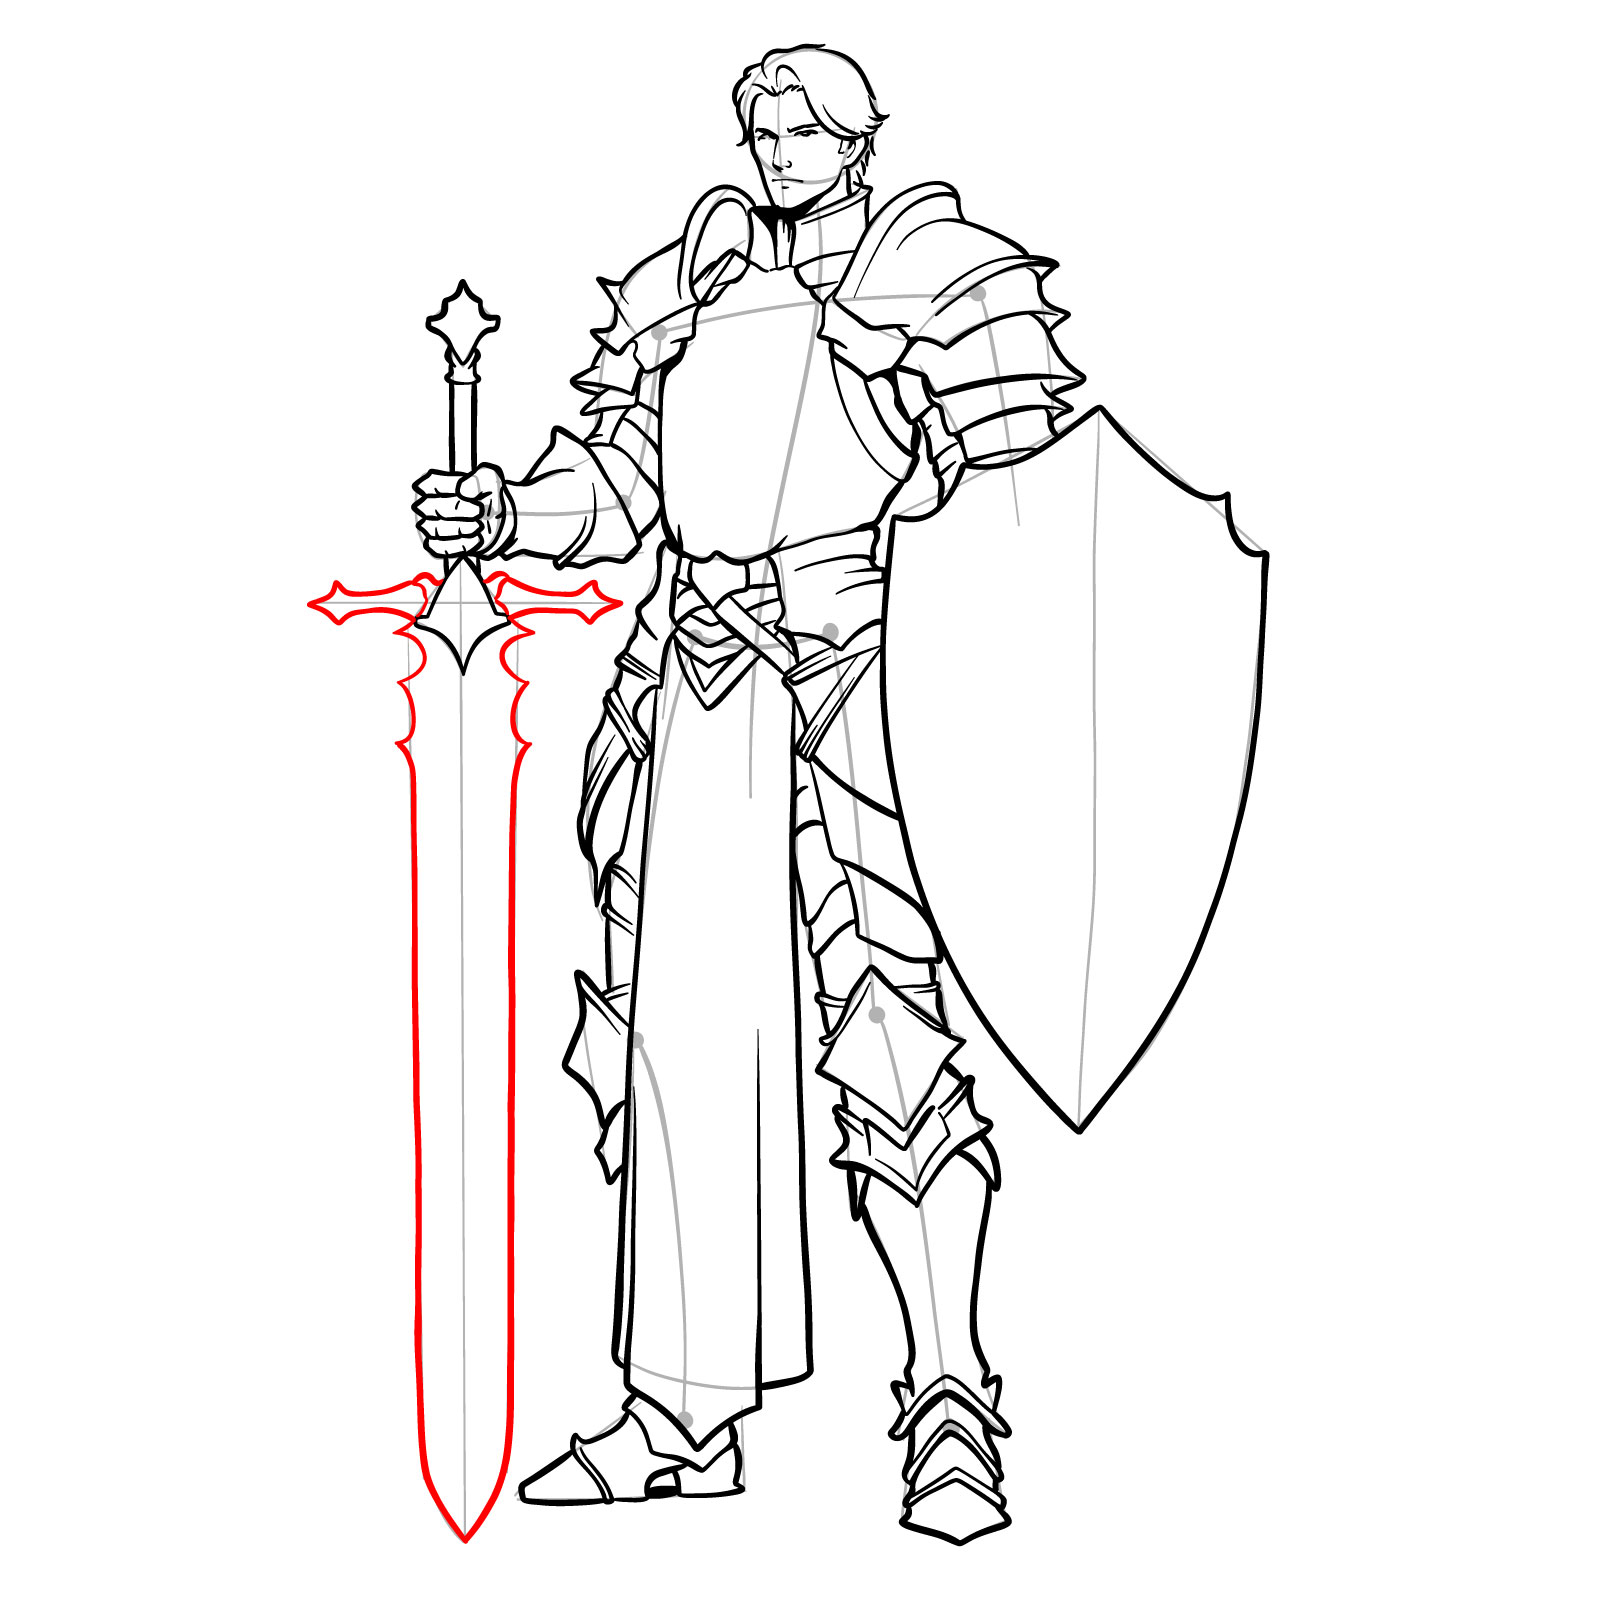 Outlining the blade of the paladin's sword - step 22